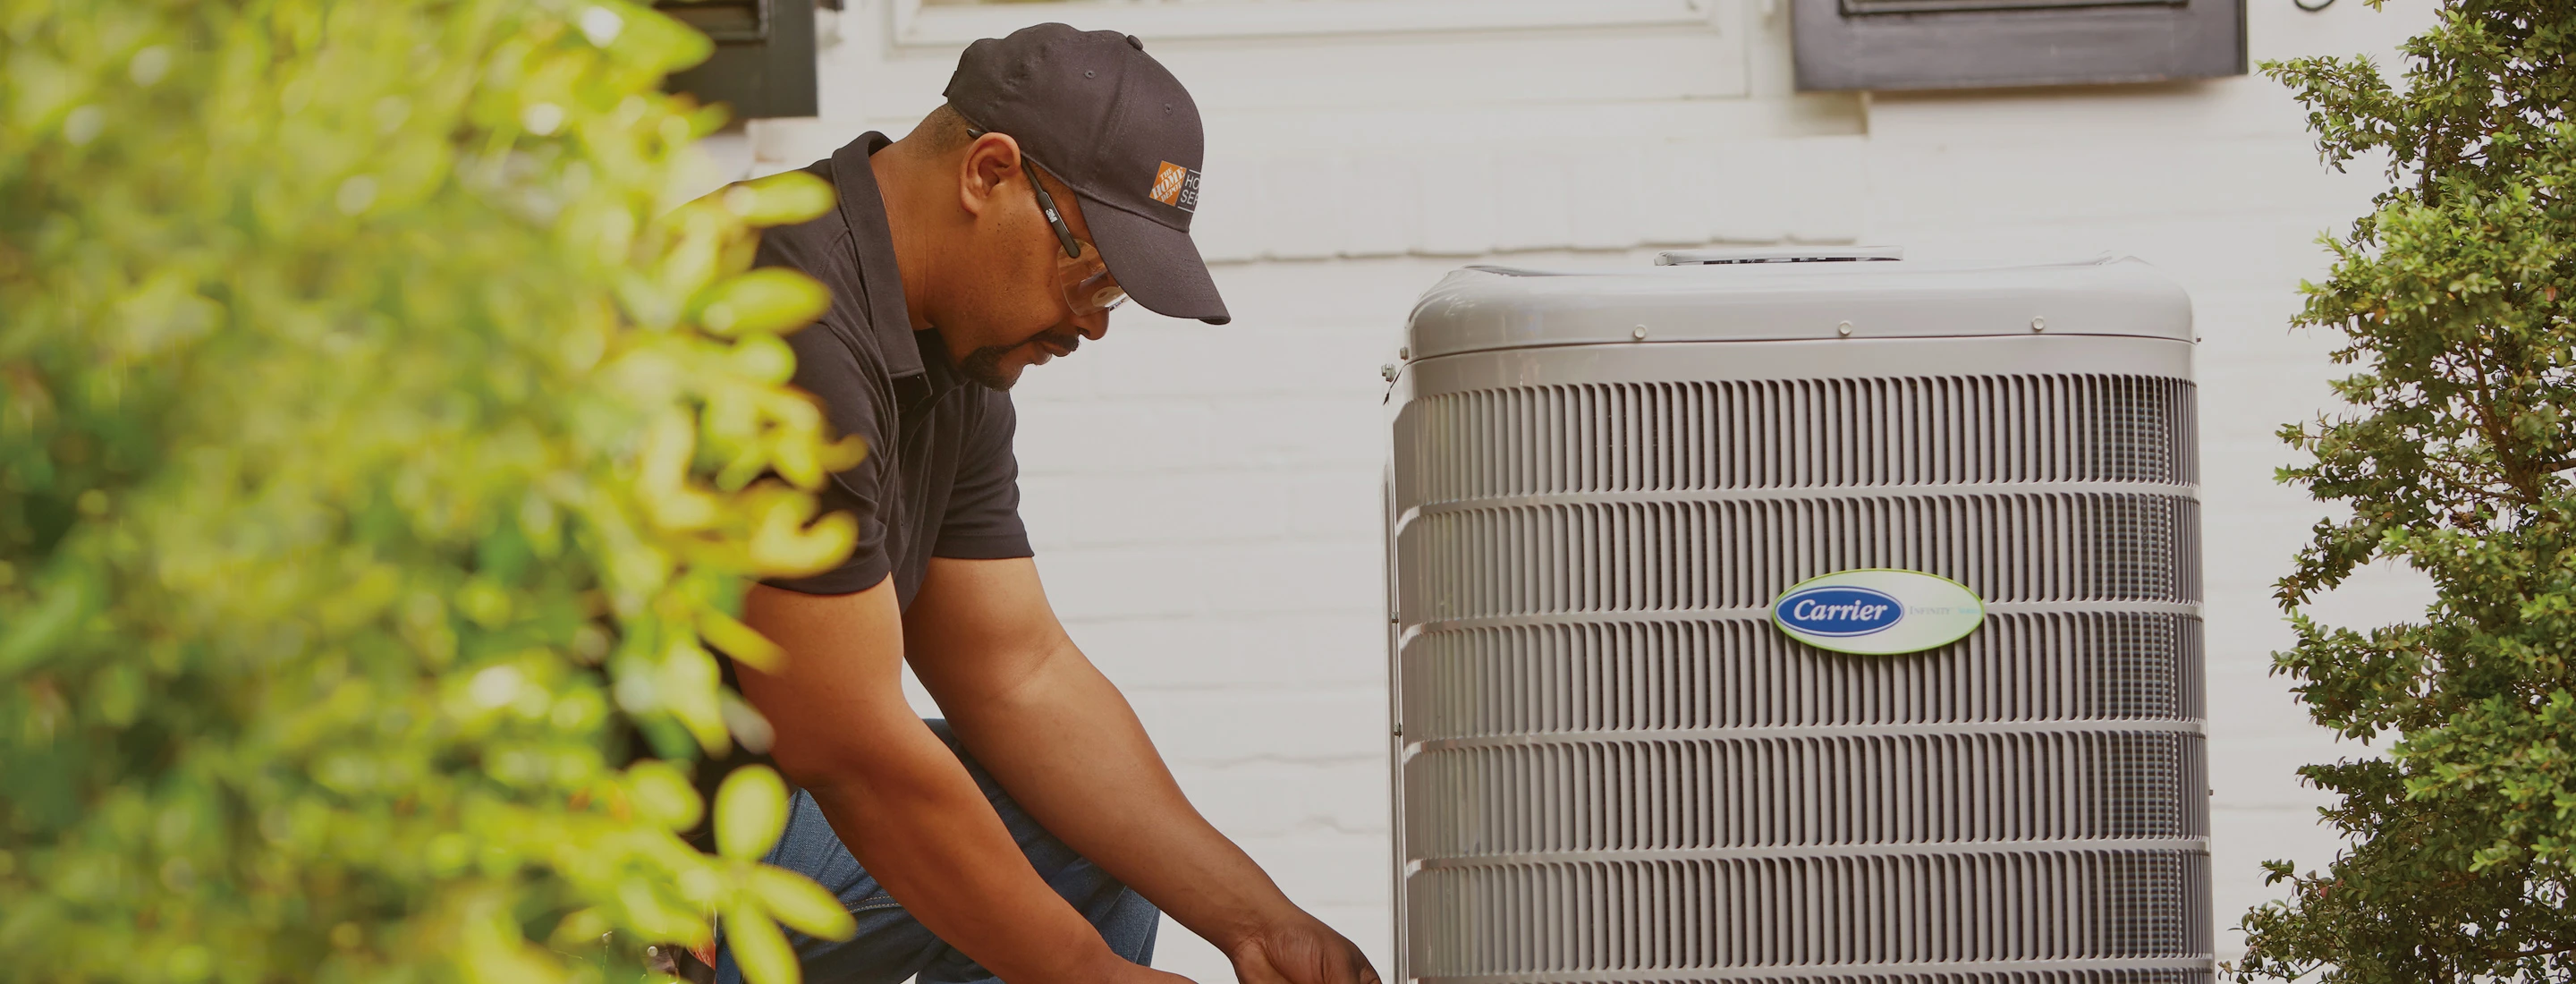 Commercial Heating And Air Conditioning